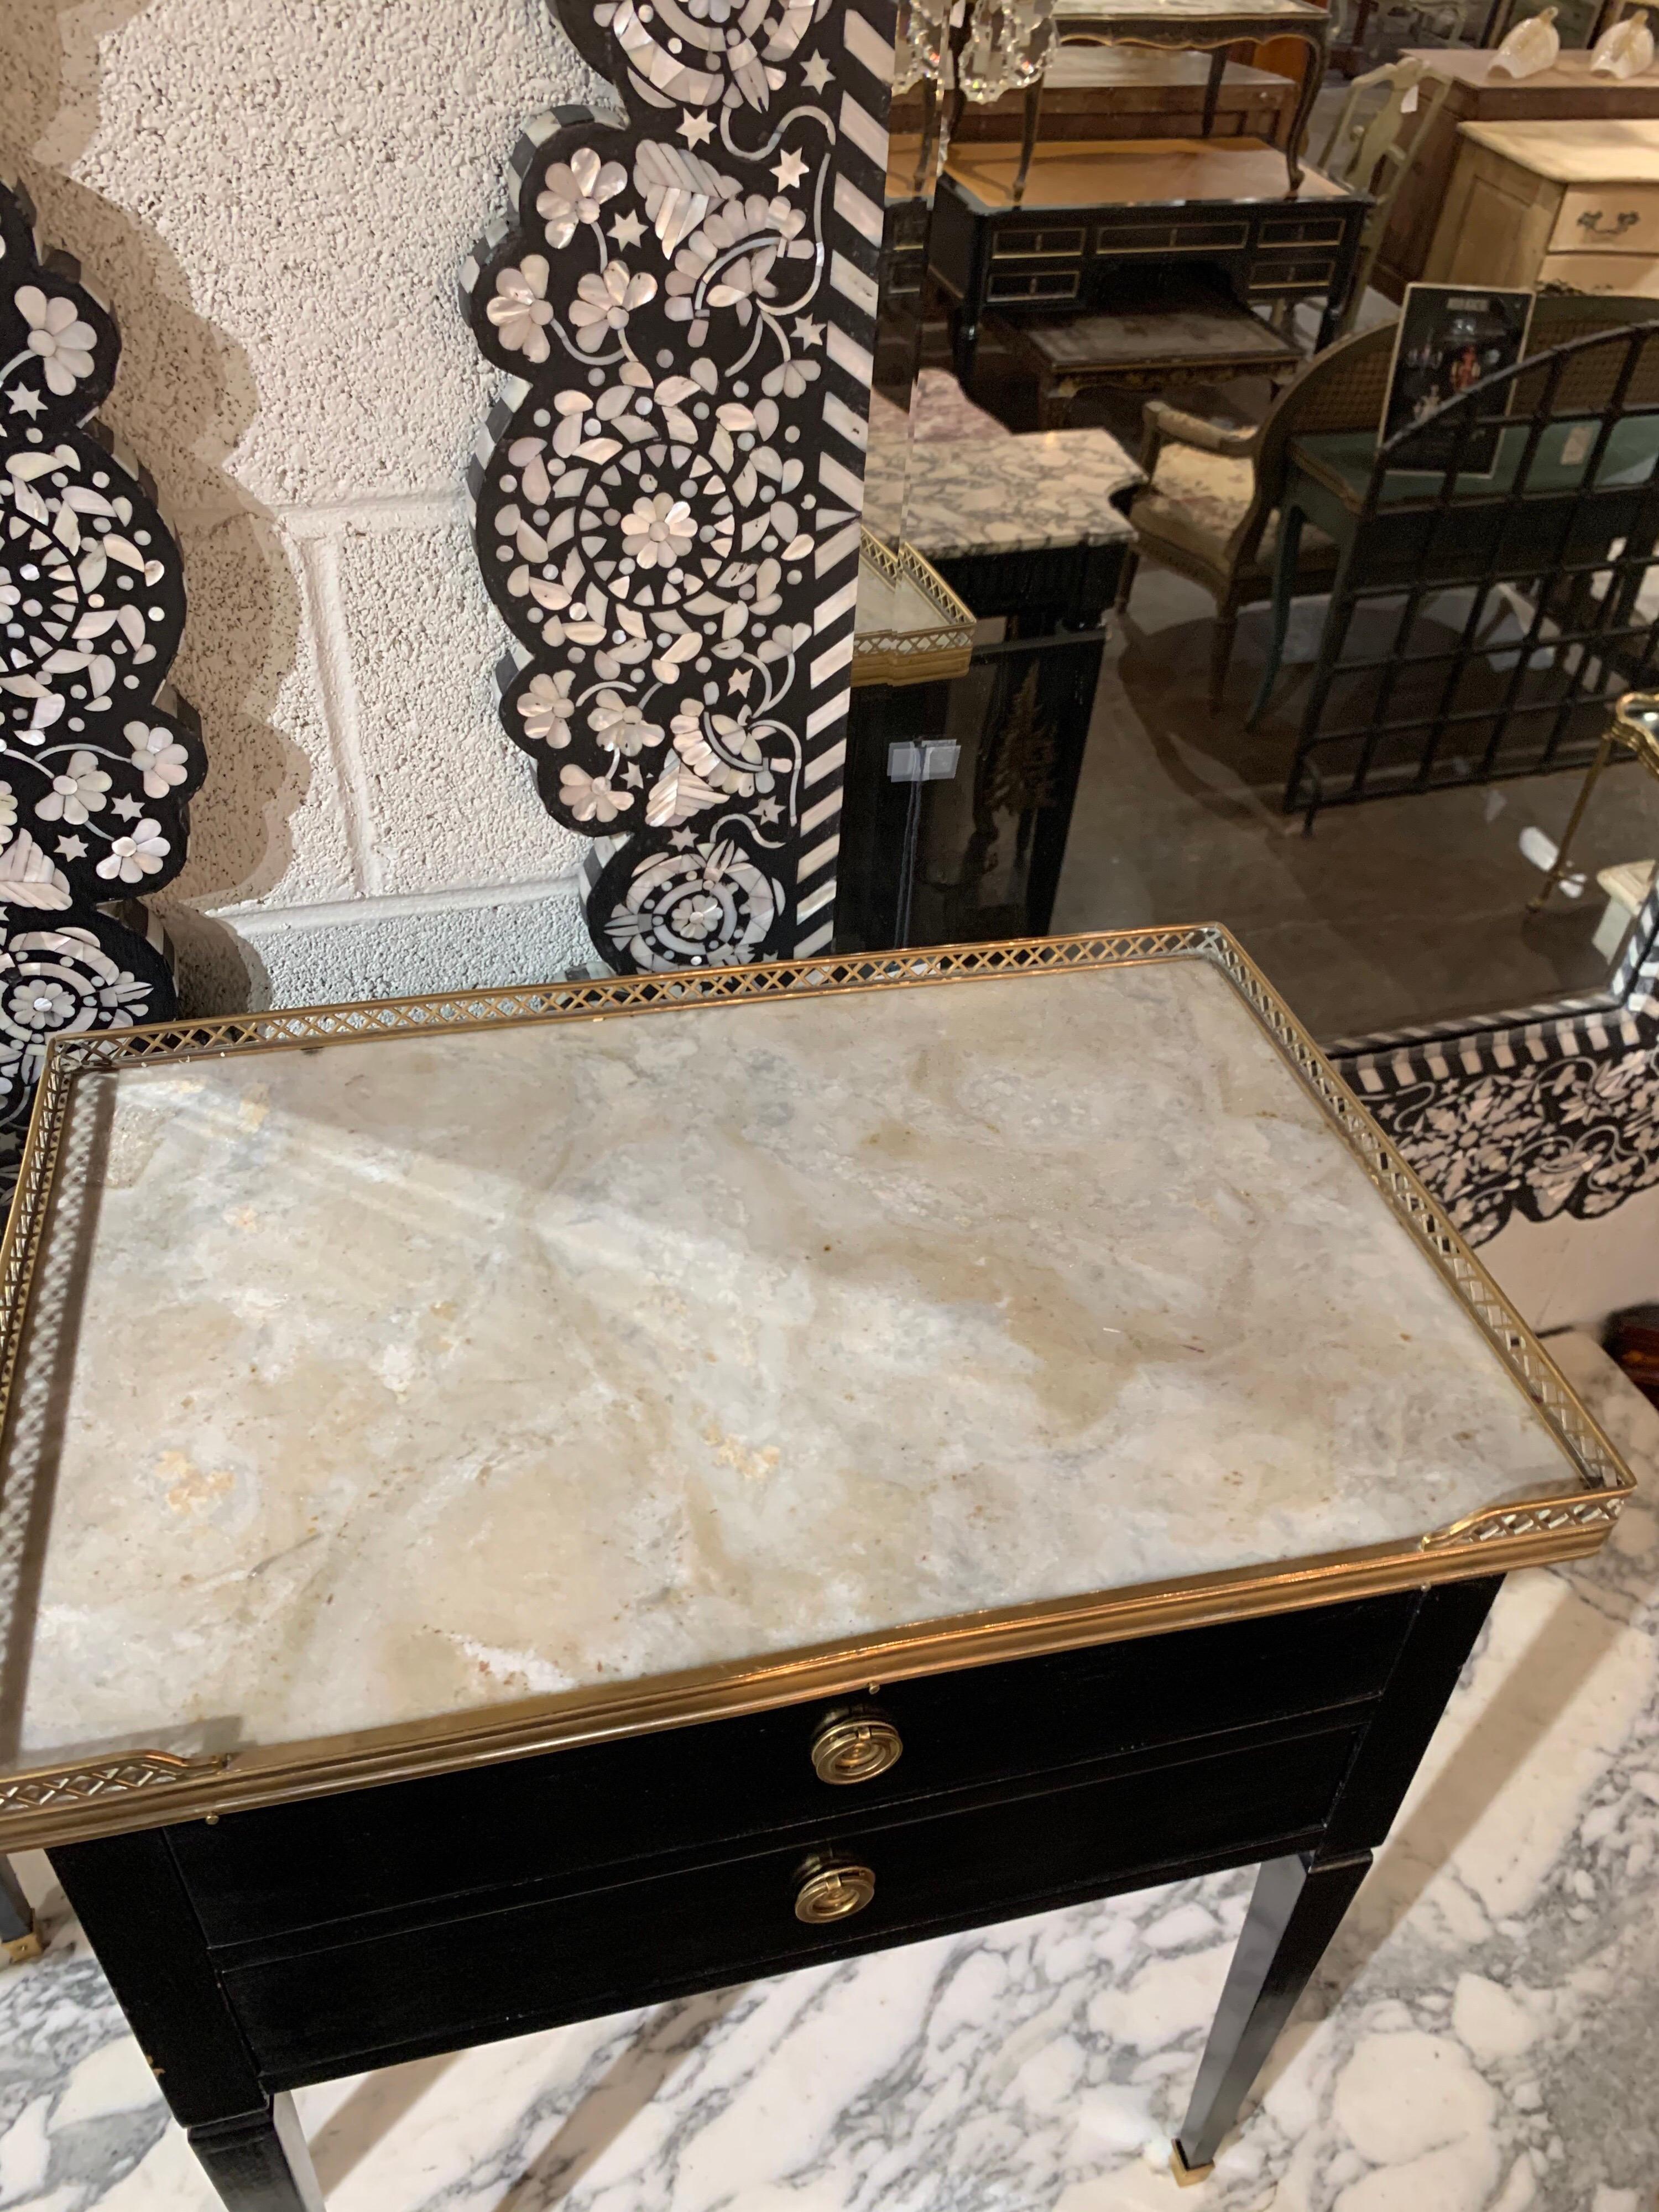 Elegant pair of French Jansen style black lacquered side tables with beautiful Carrara marble tops. The tables also have lovely brass details. An excellent pair for a variety of decors!